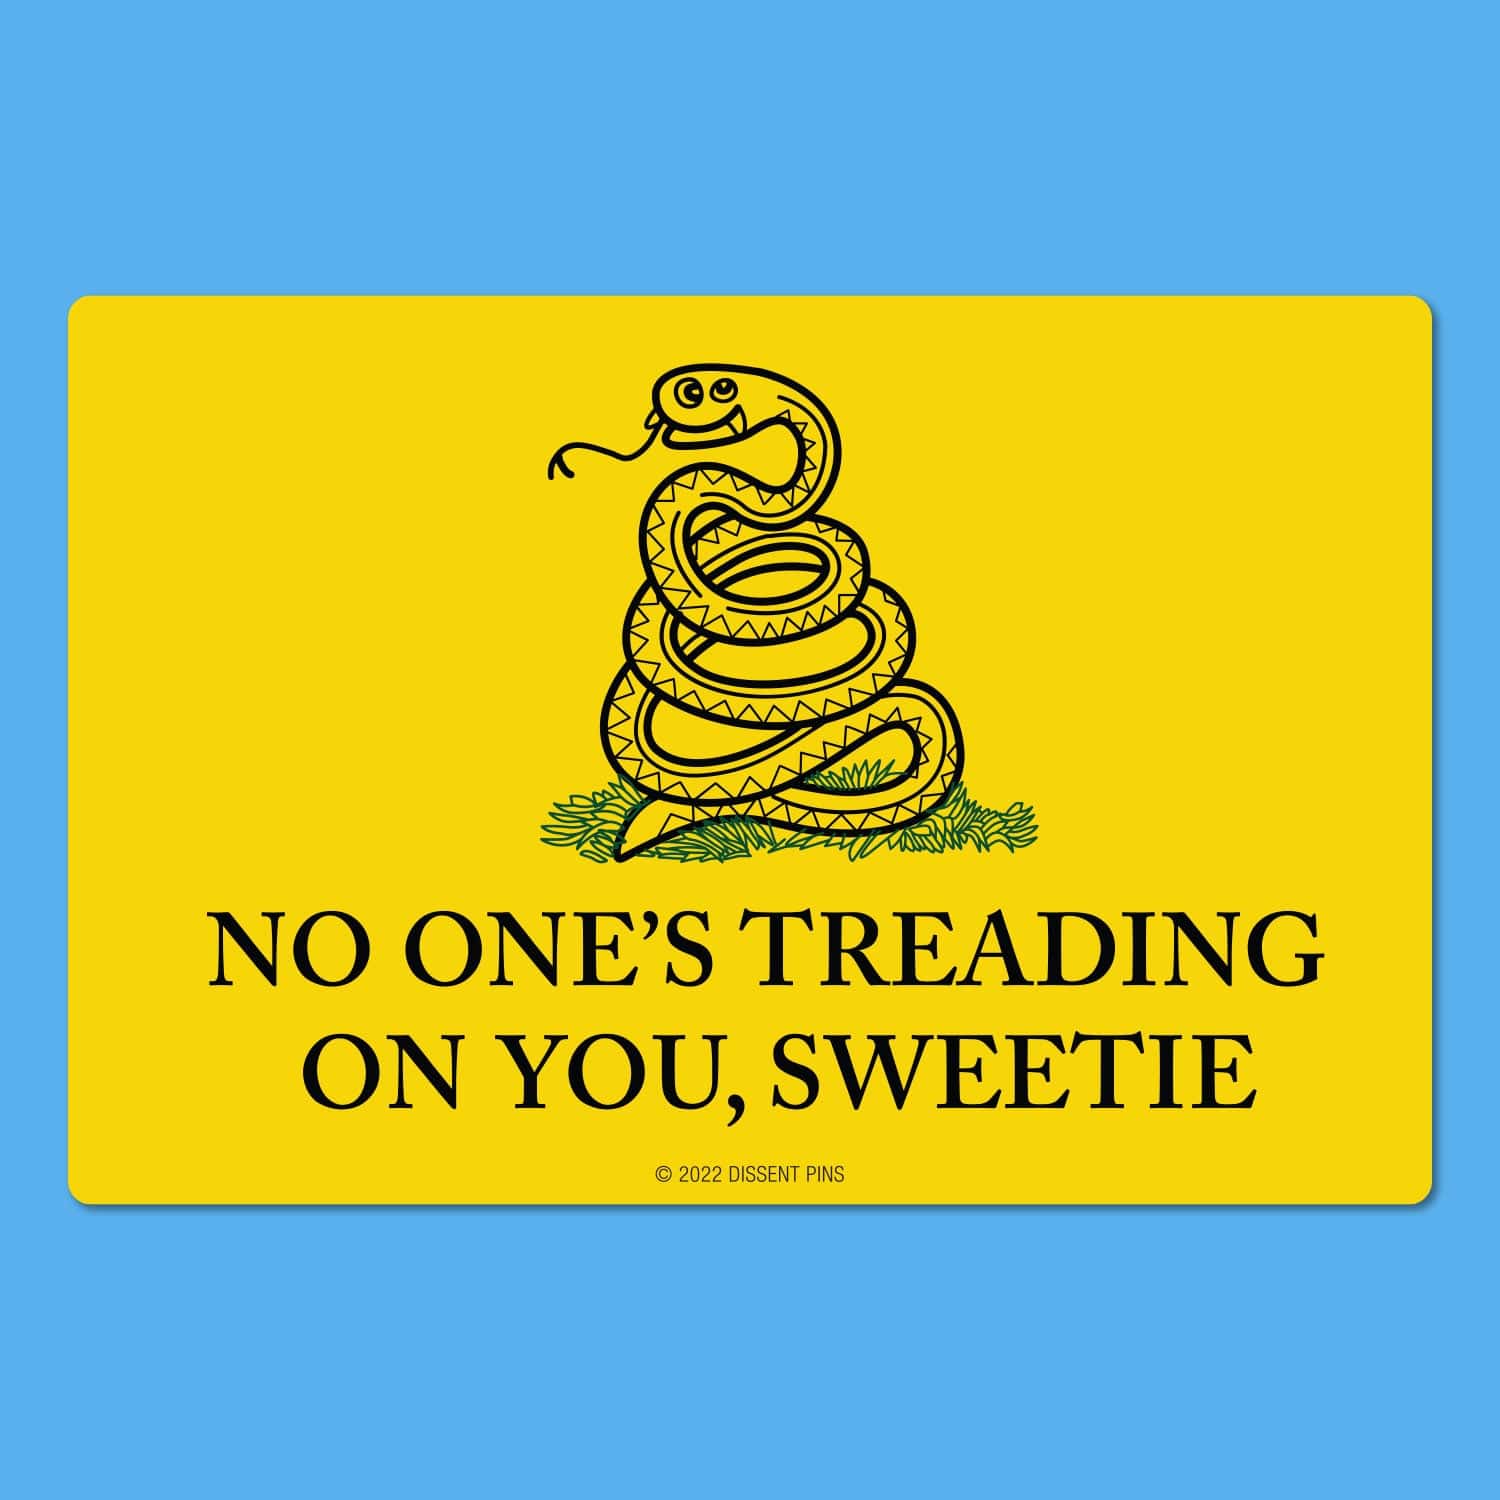 No One's Treading On You, Sweetie - Sticker